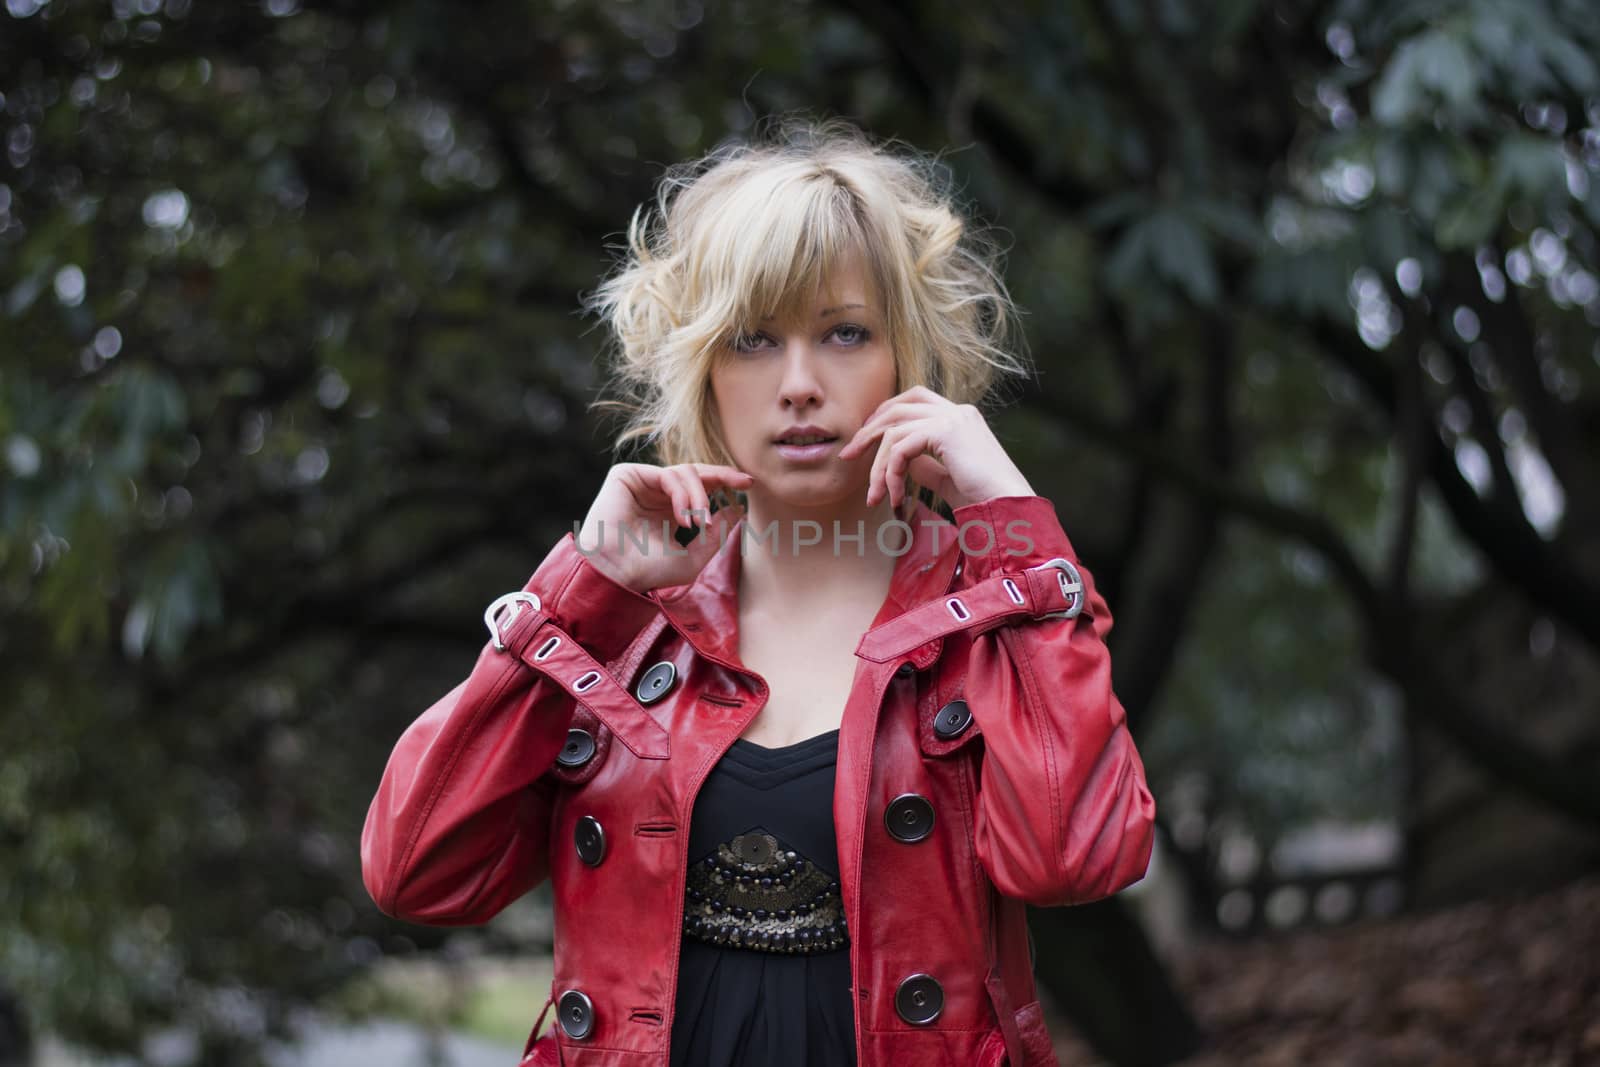 Attractive young woman with red leather jacket by artofphoto